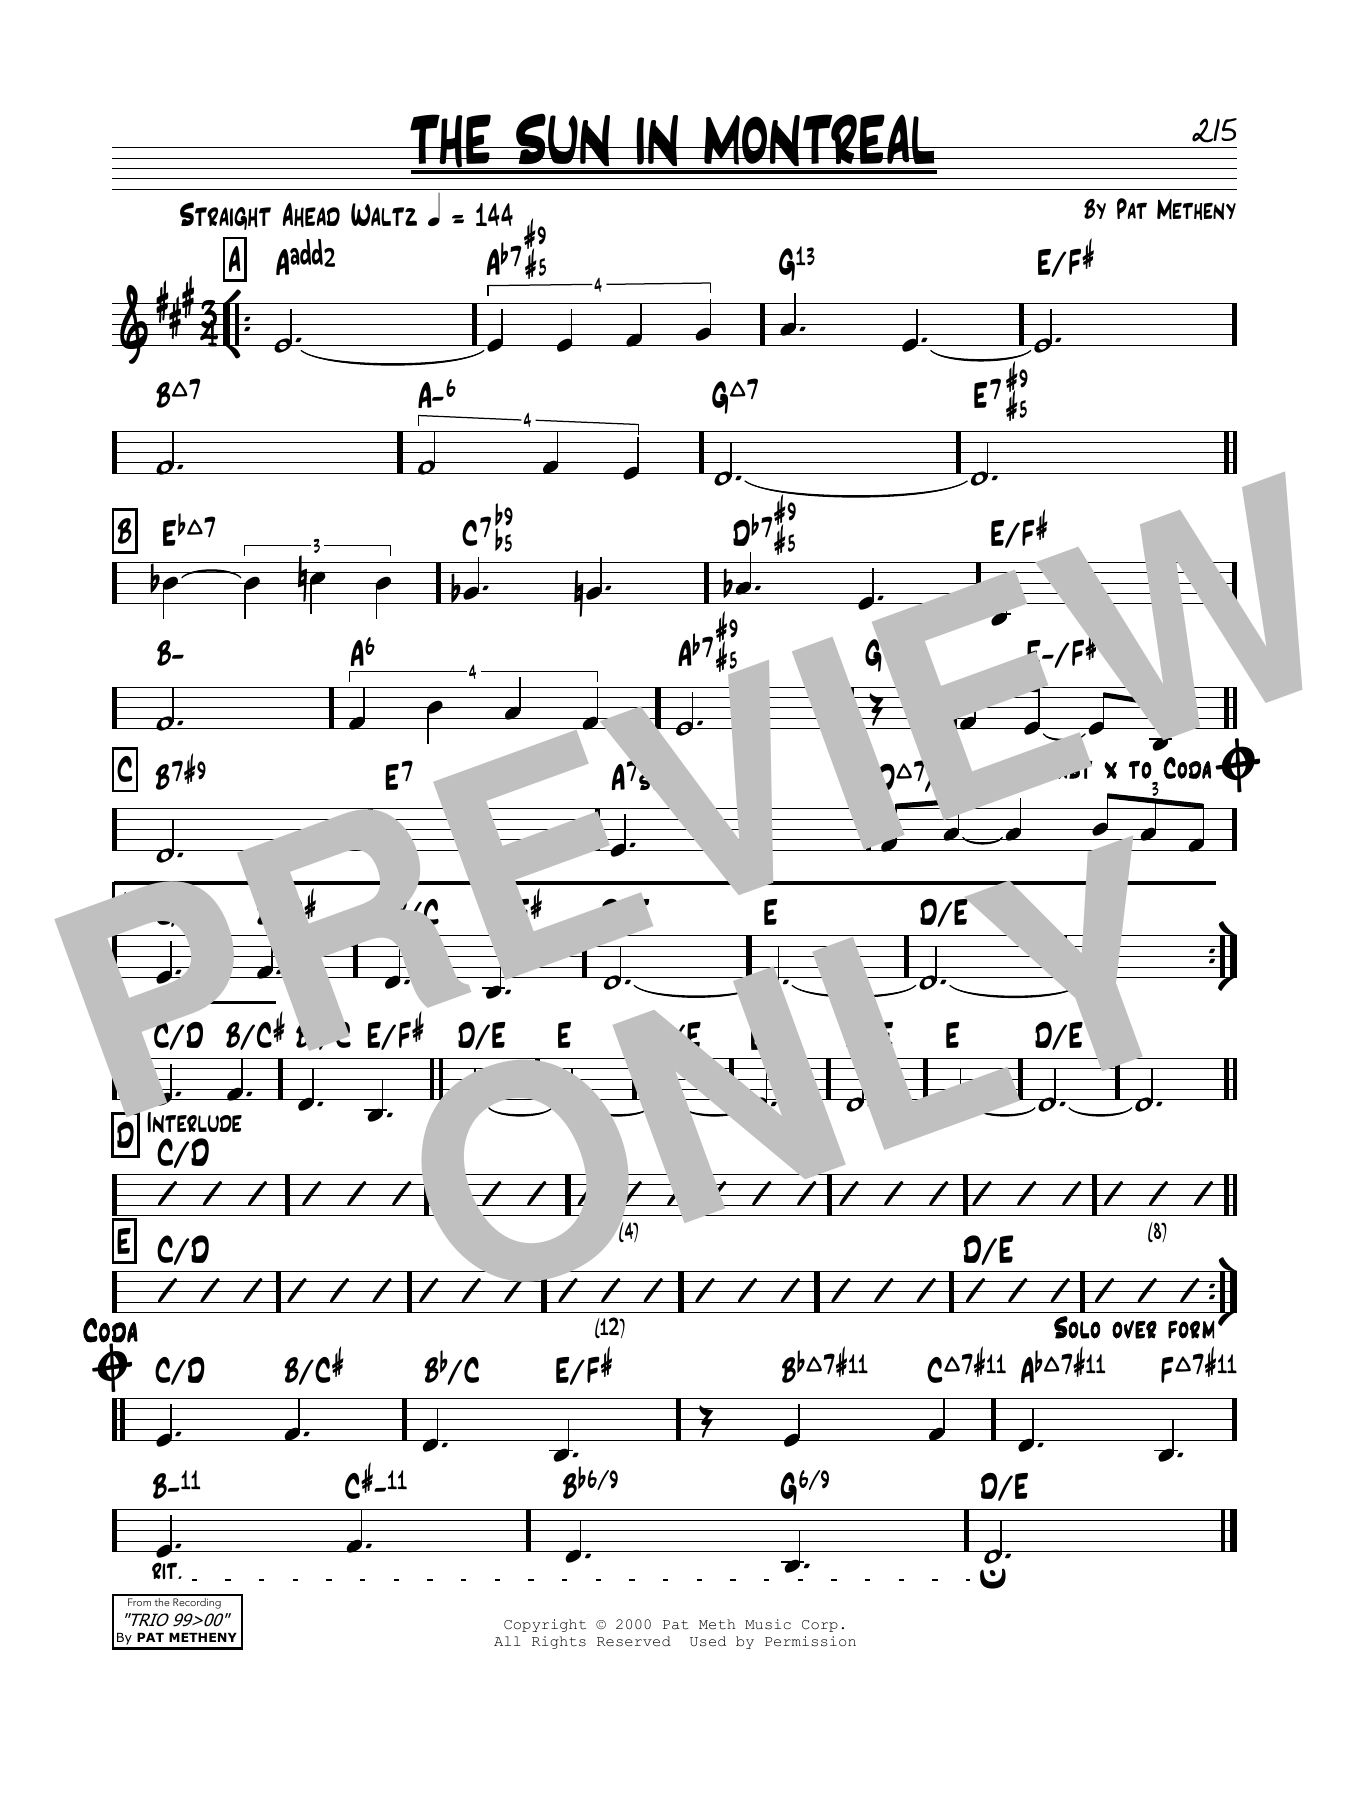 Download Pat Metheny The Sun In Montreal Sheet Music